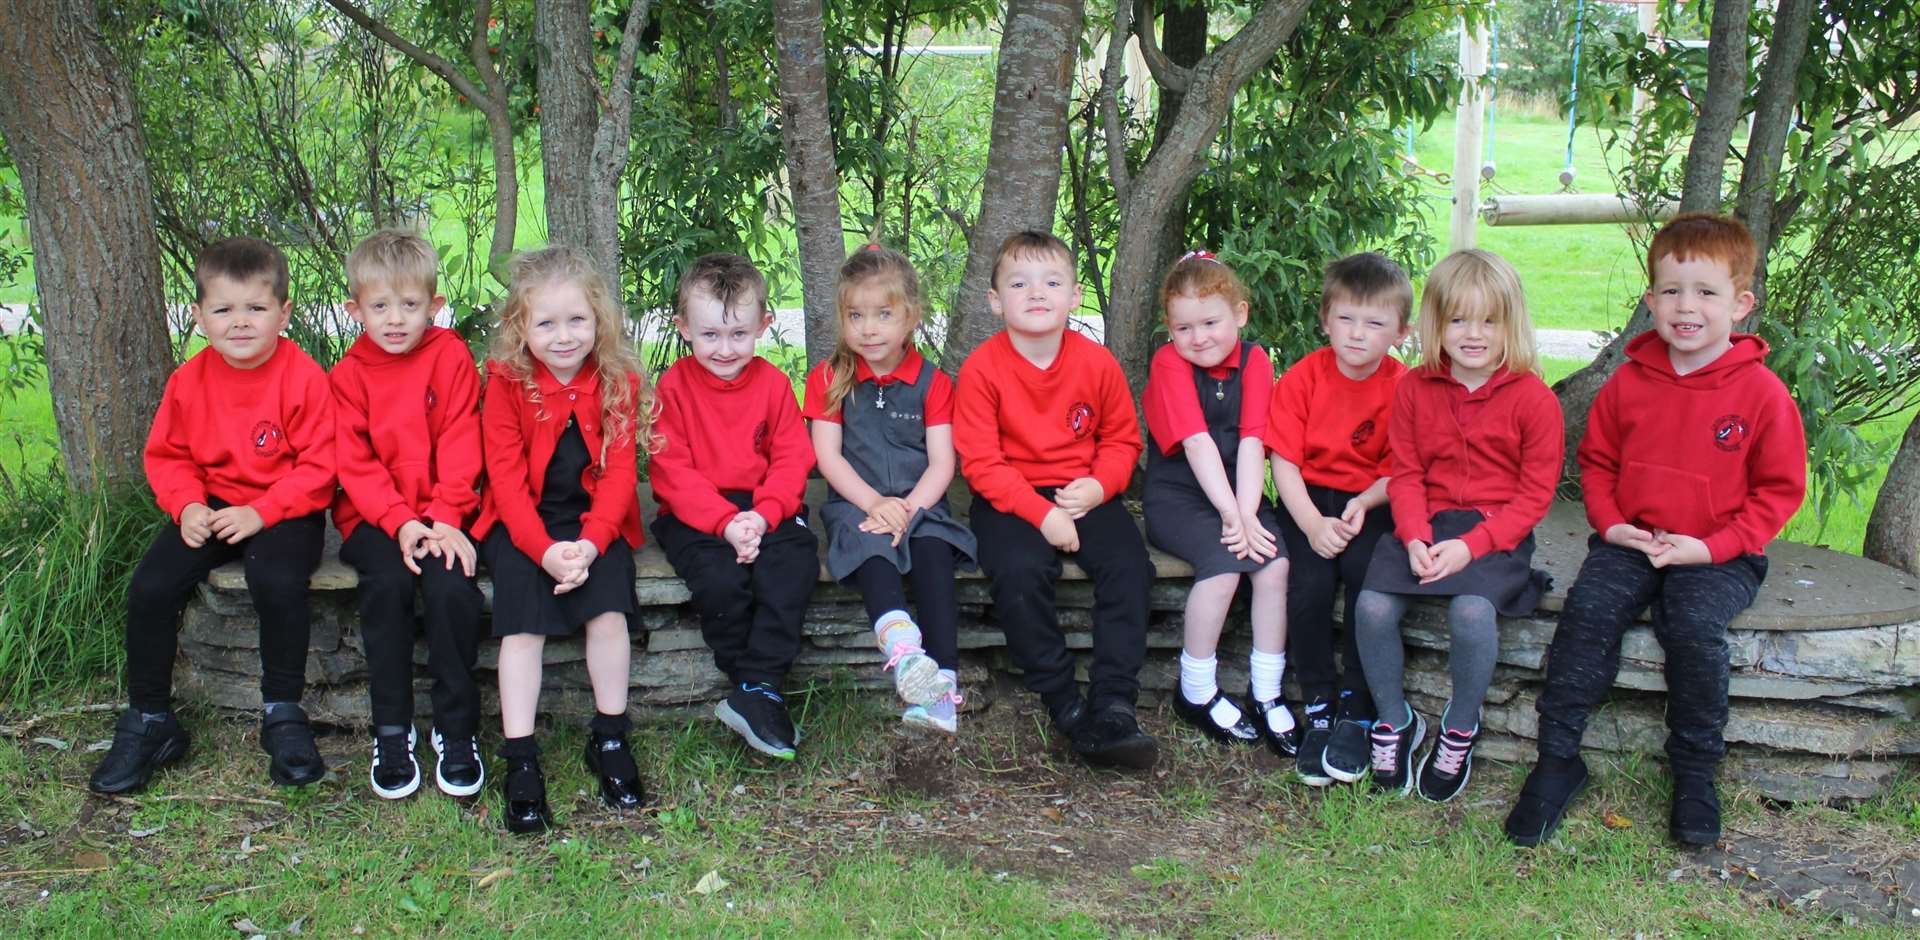 The new P1 children at Castletown Primary.